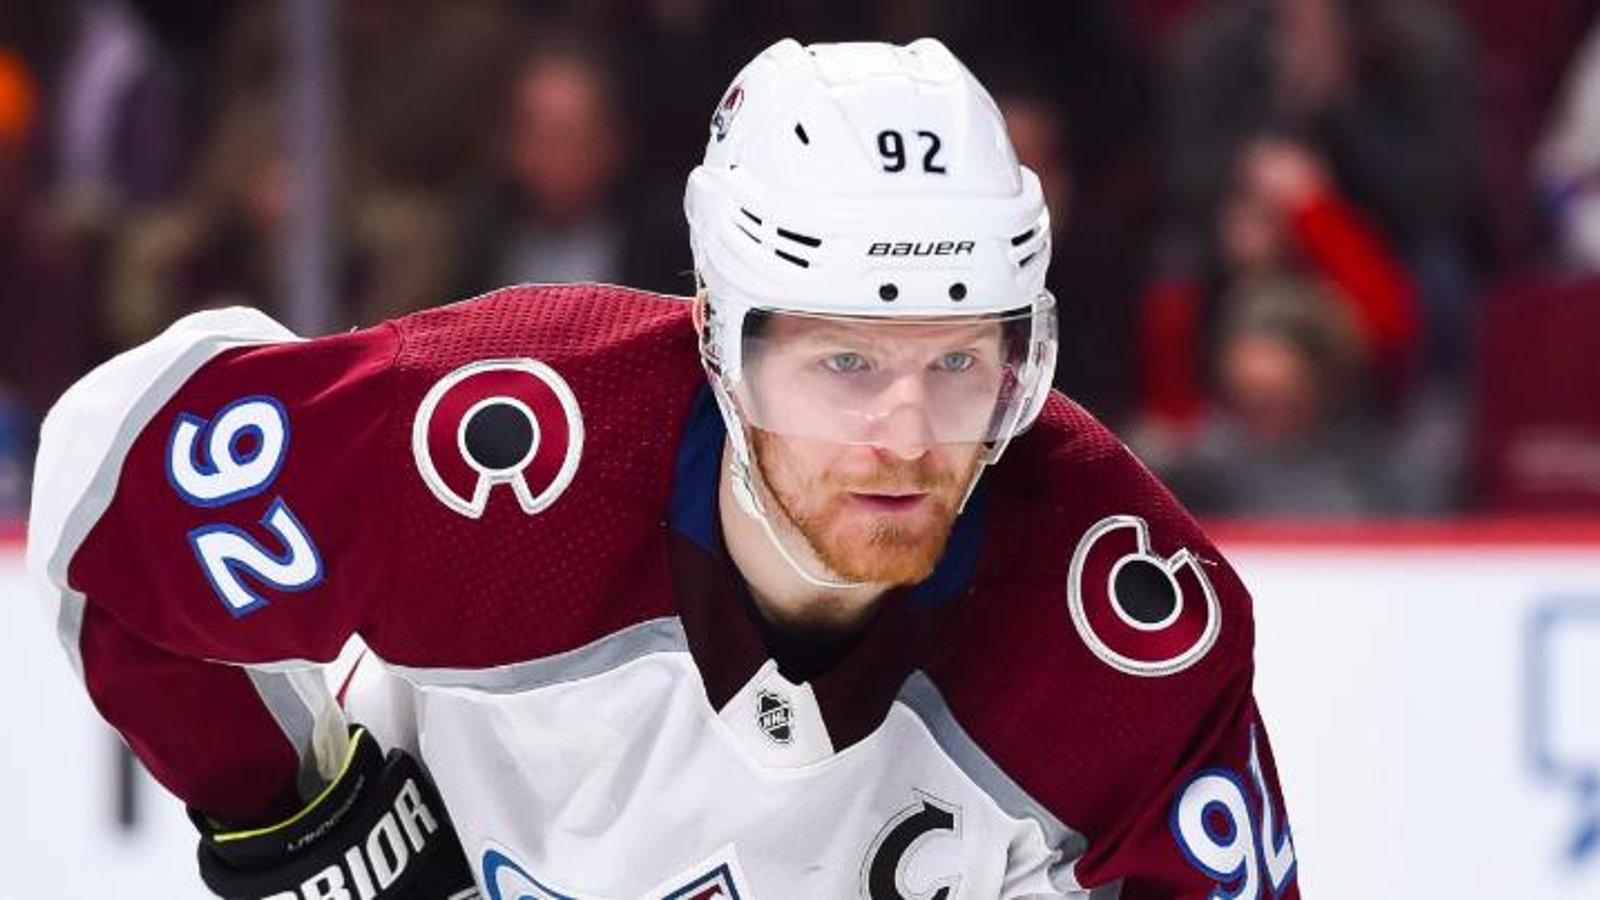 Gabriel Landeskog receives a heartwarming letter from a young fan about his role as anti-bullying ambassador